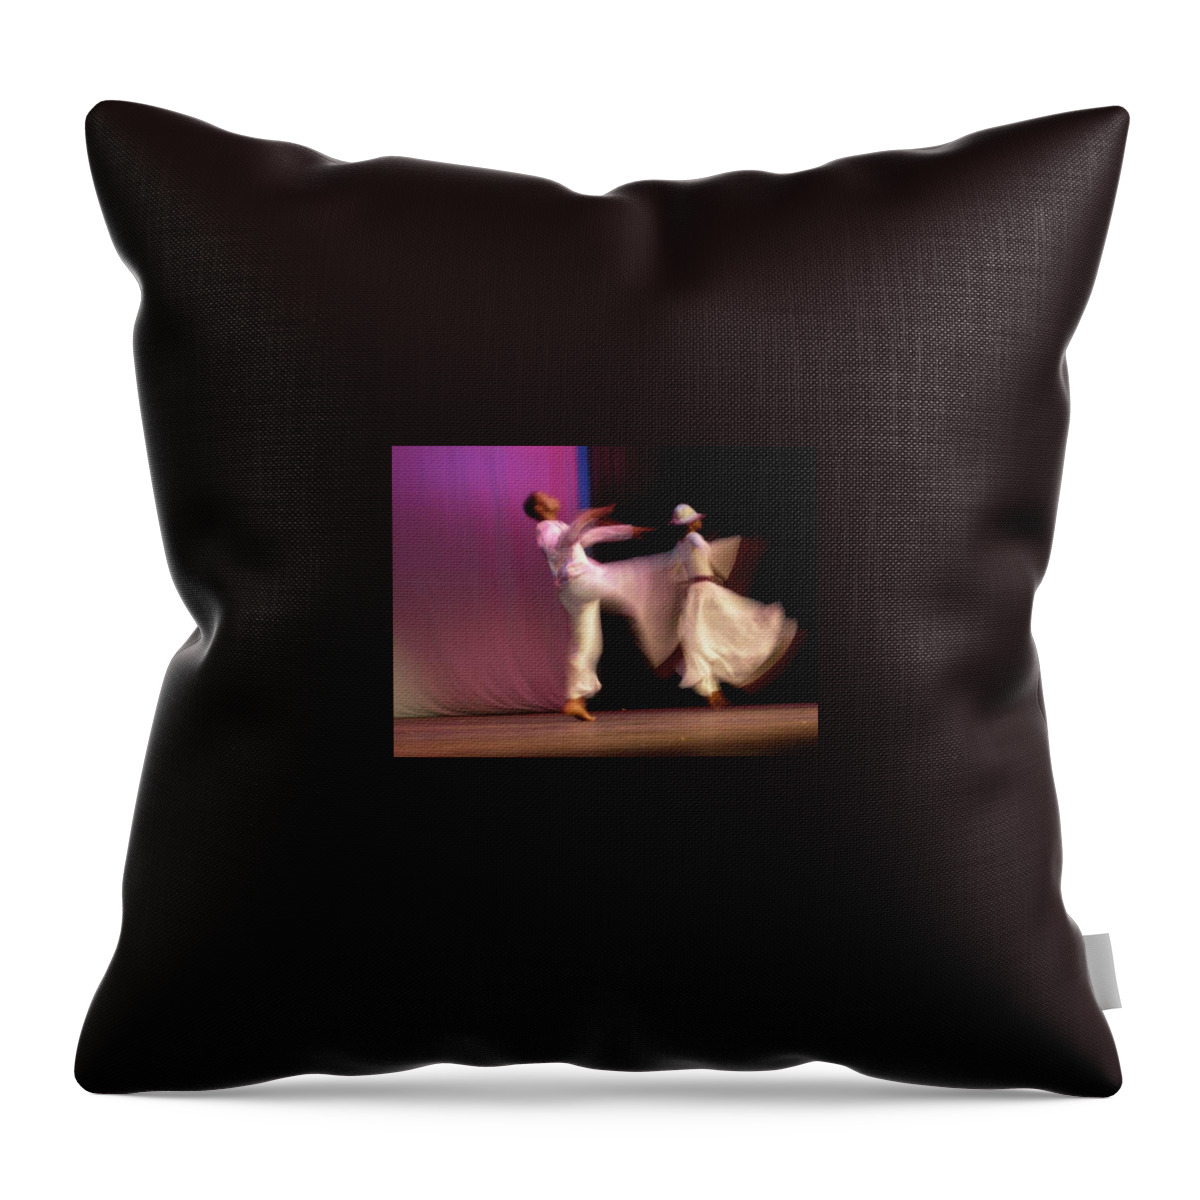  Throw Pillow featuring the painting Chantilly 1 by Trevor A Smith